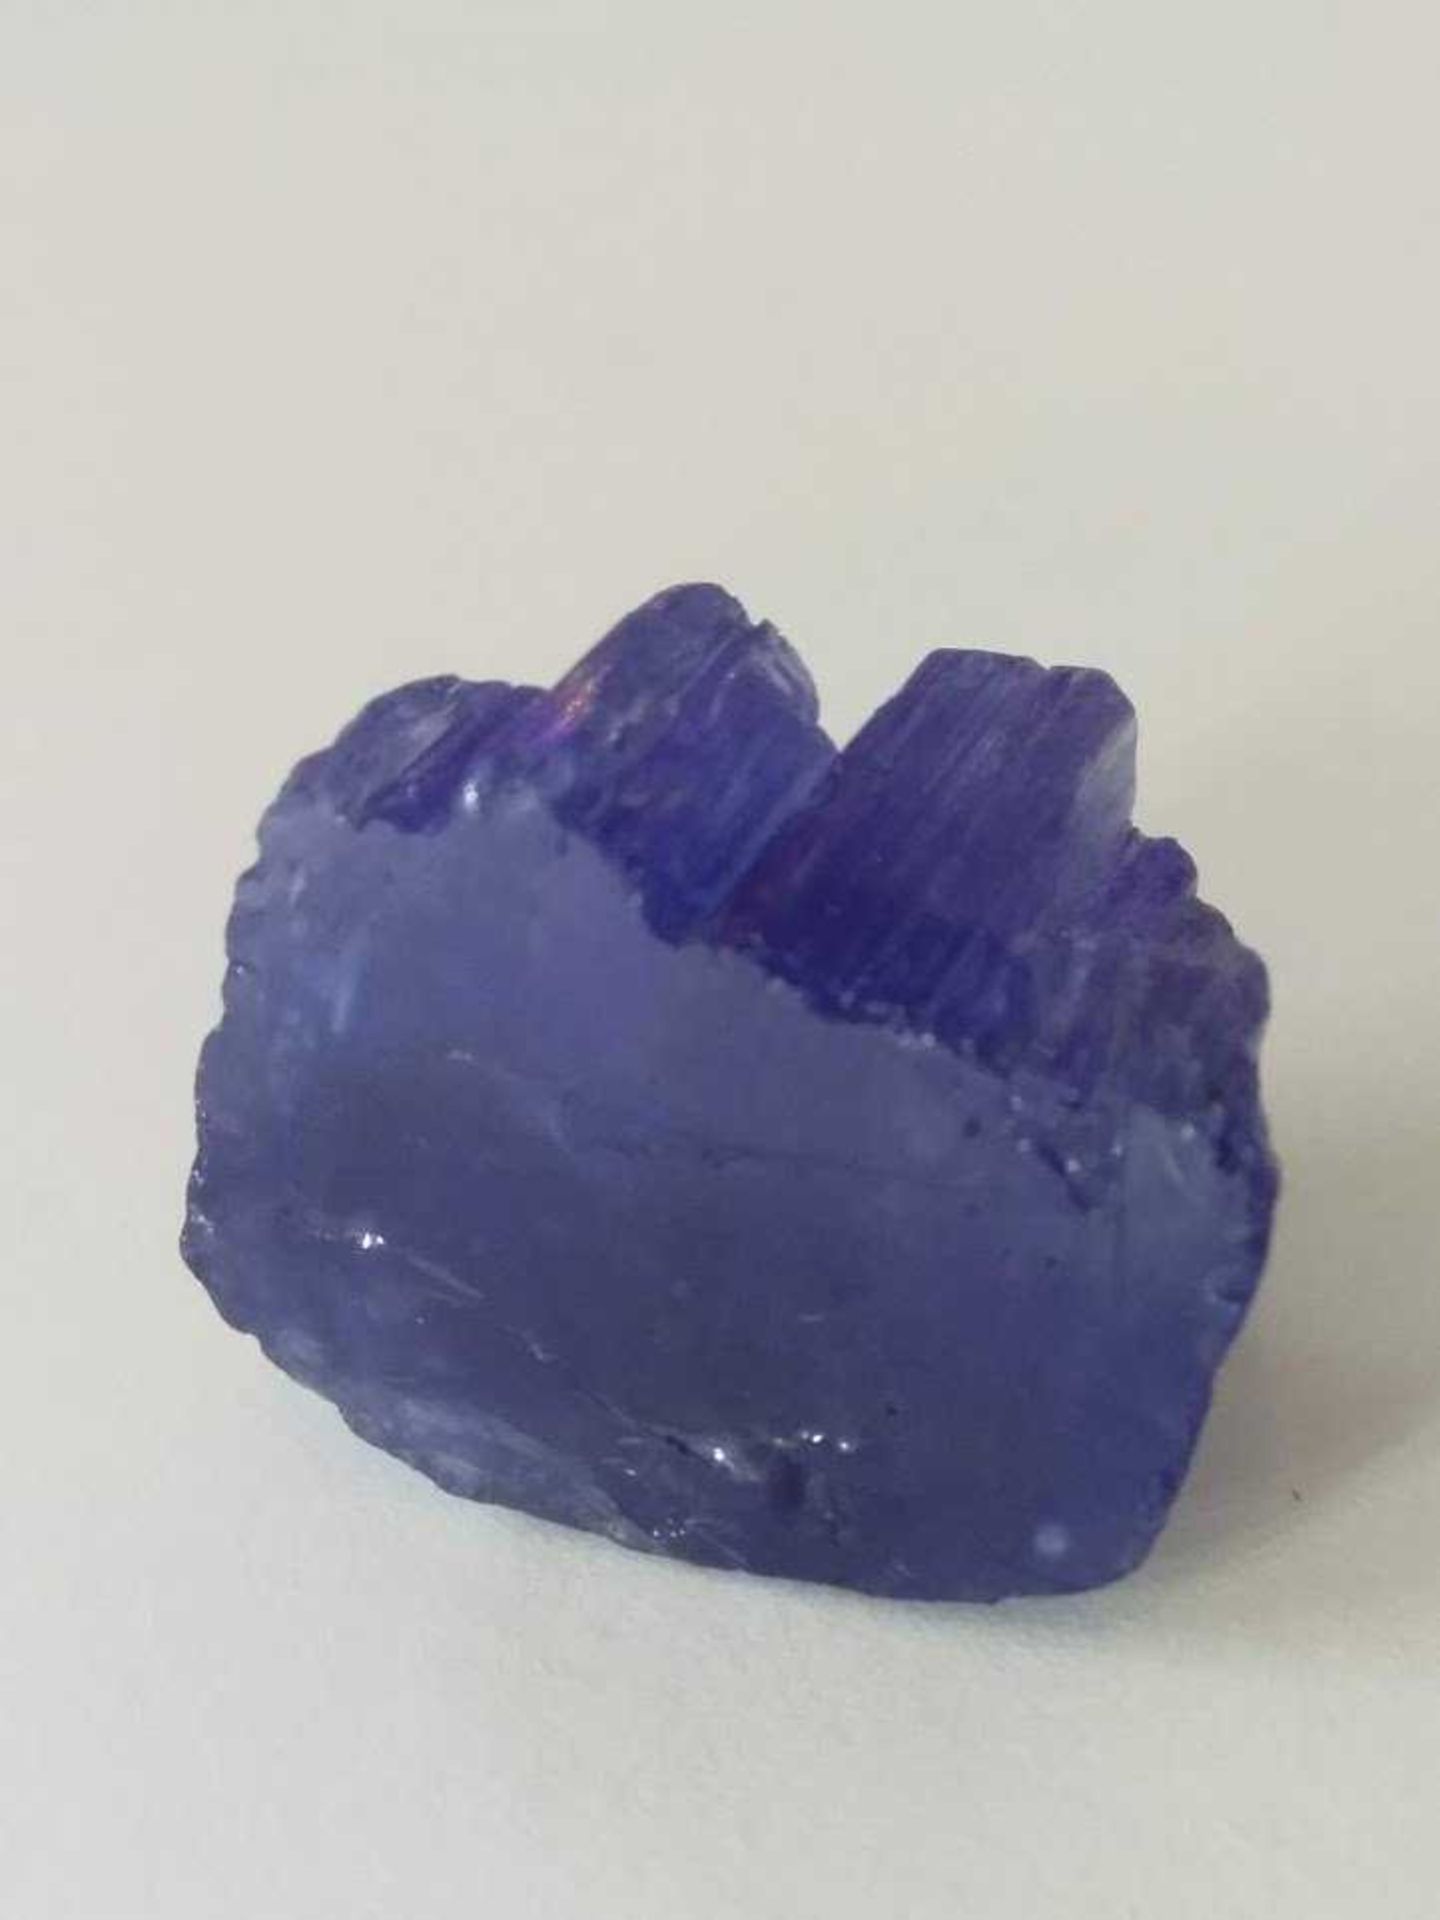 HIGH VALUE - An incredible IGL&I certified - Stunning Blue colour - large 108 Carat Natural - Image 2 of 3